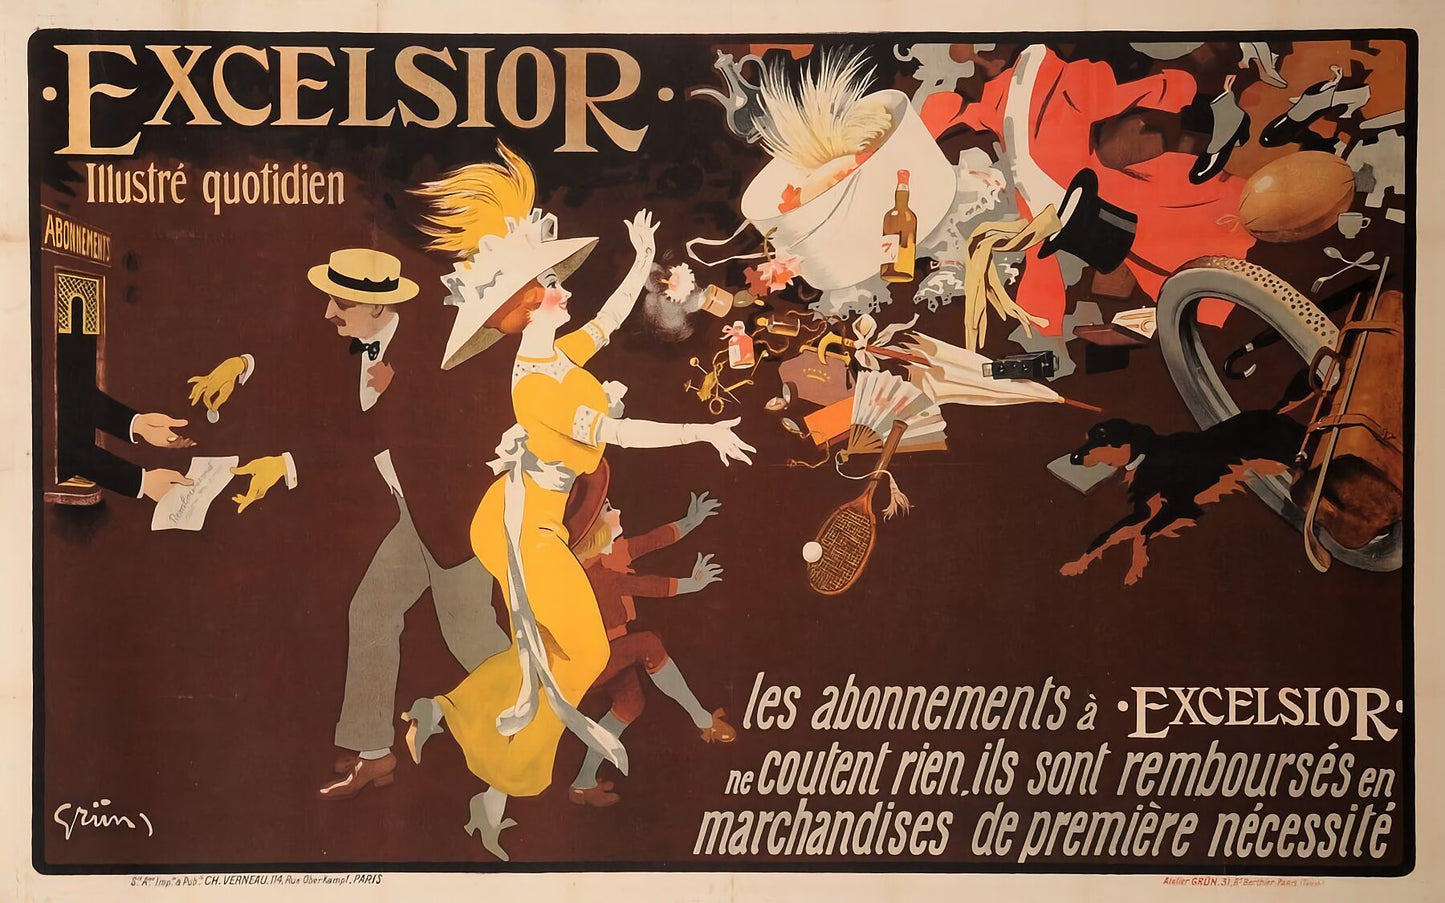 Poster by Jules-Alexandre Grün (1868 – 1934) created in ca. 1920